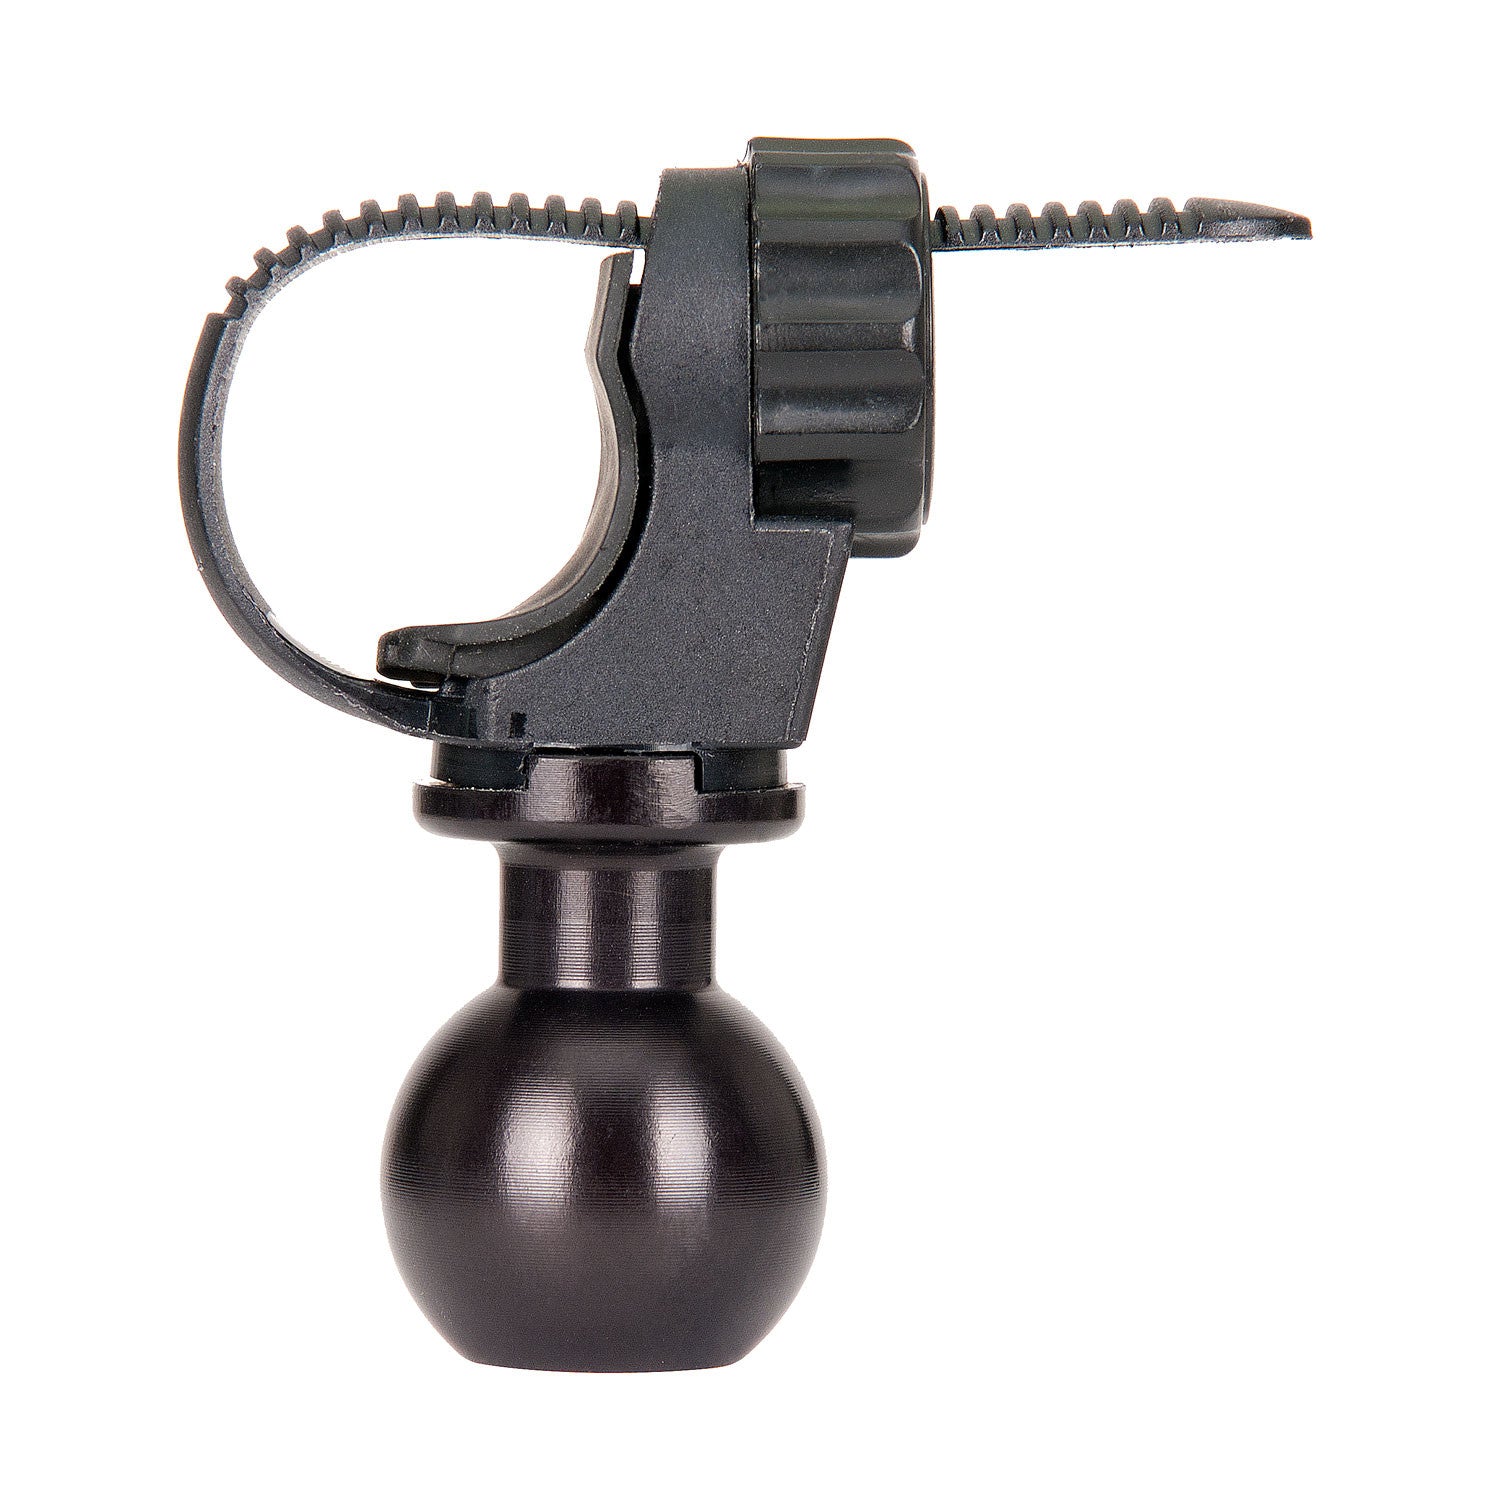 1-inch Ball Mount for Gamma